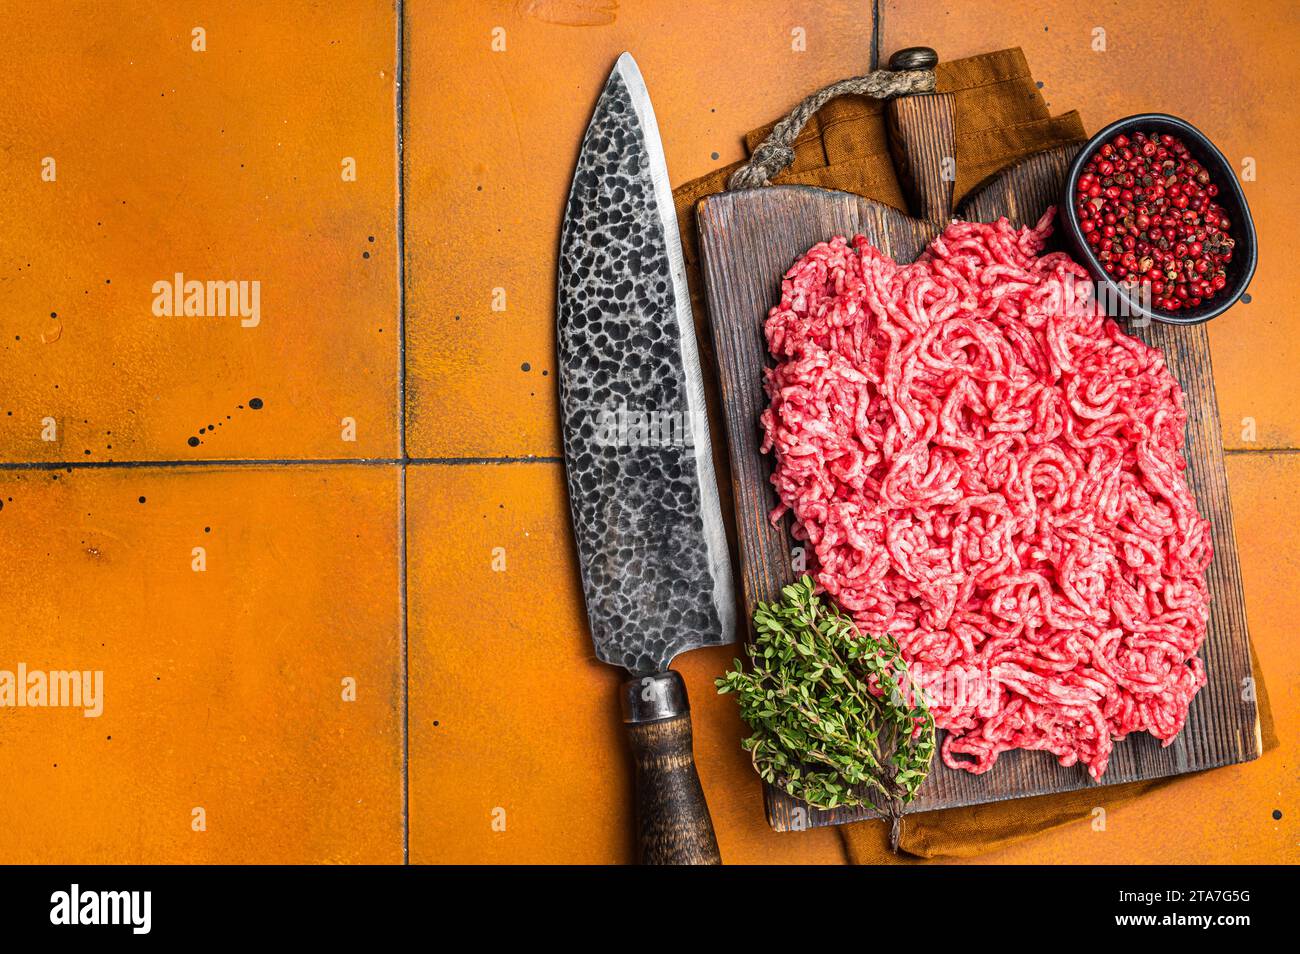 Fresh Raw Mince, Ground beef and pork meat on a butcher board. Orange background. Top view. Copy space. Stock Photo